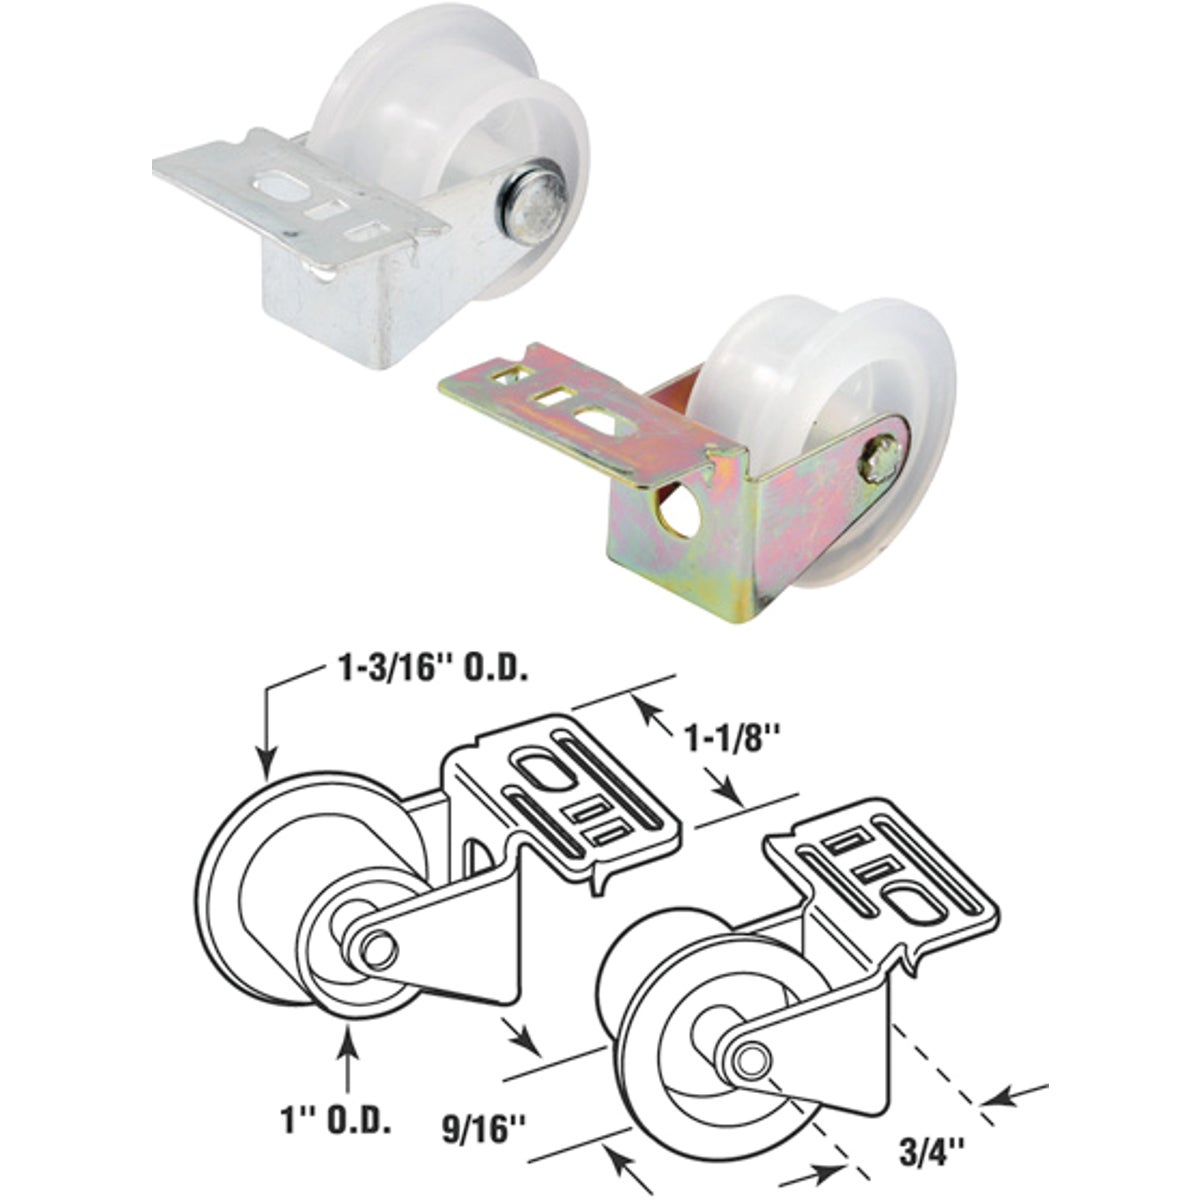 Item 235717, Rollers mount at the front of the drawer opening, and help center the 